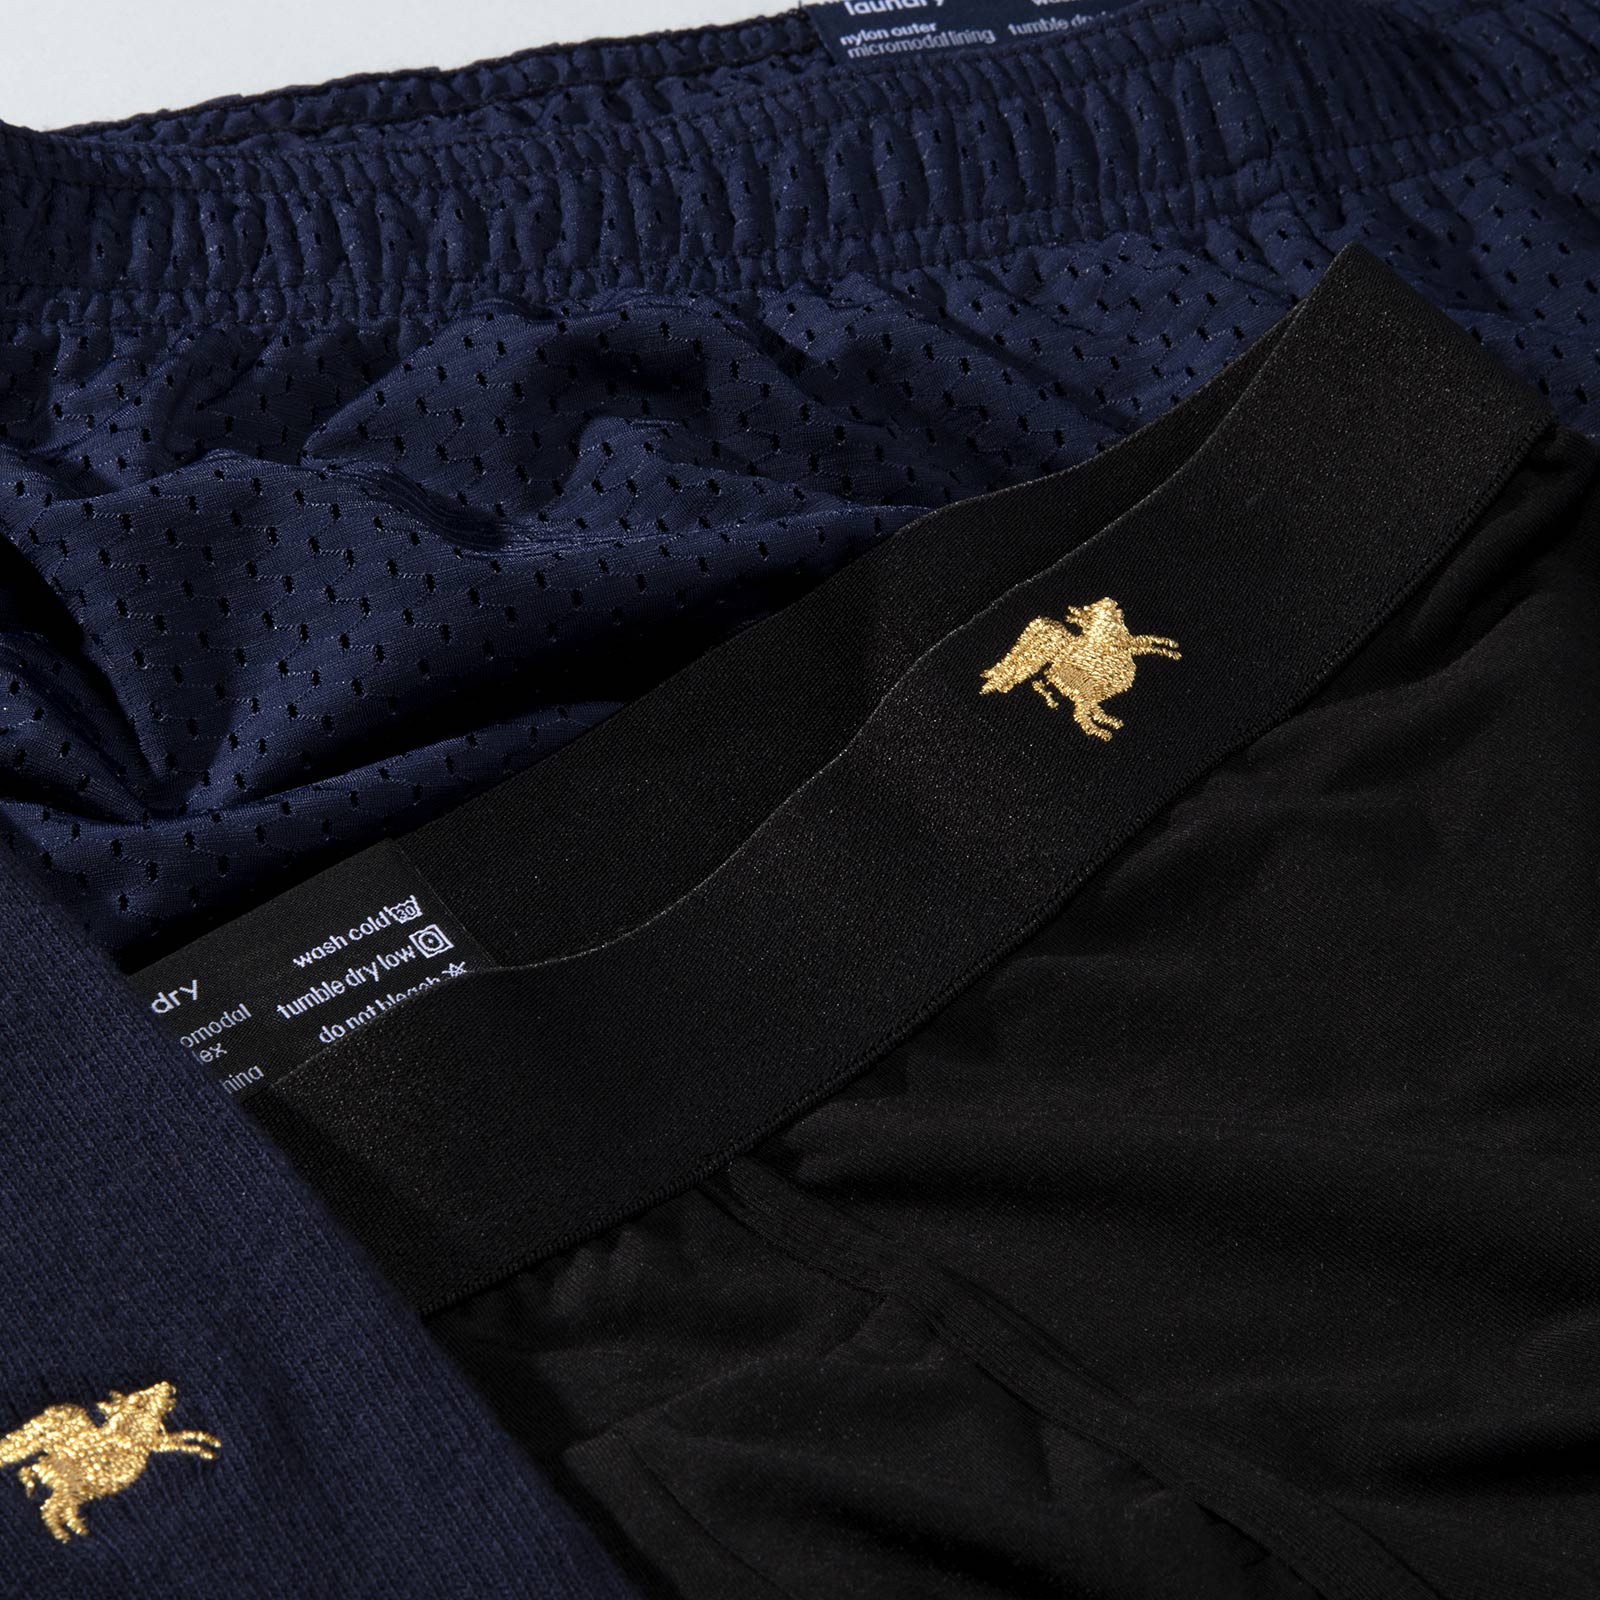 Lounge shorts and socks with flying pig icon embroidery.